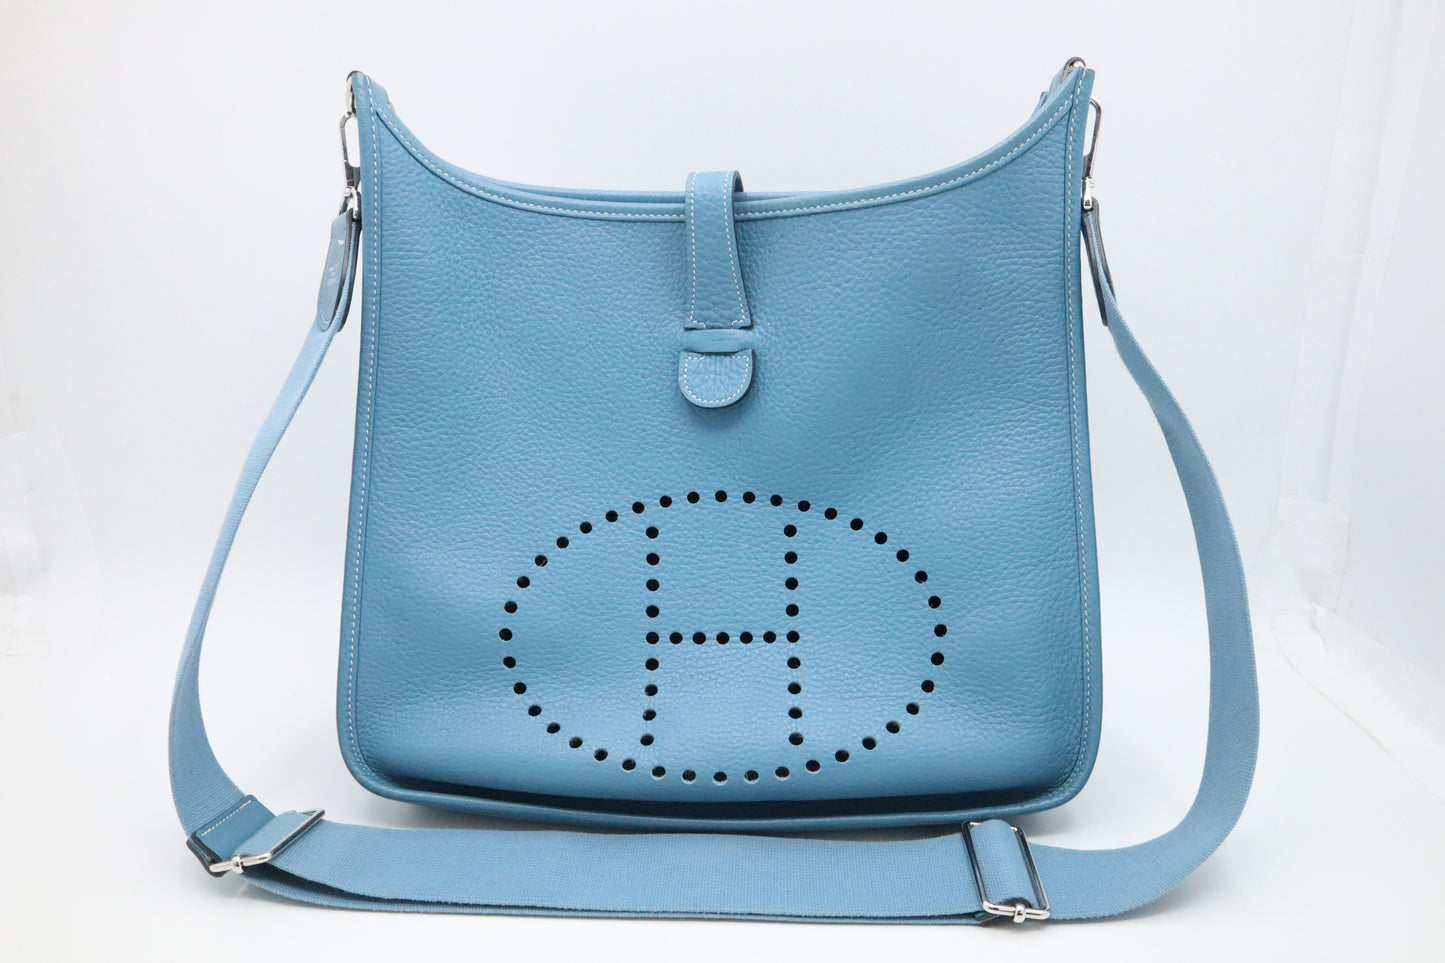 Hermes Evelyne III 33 in Blue Leather